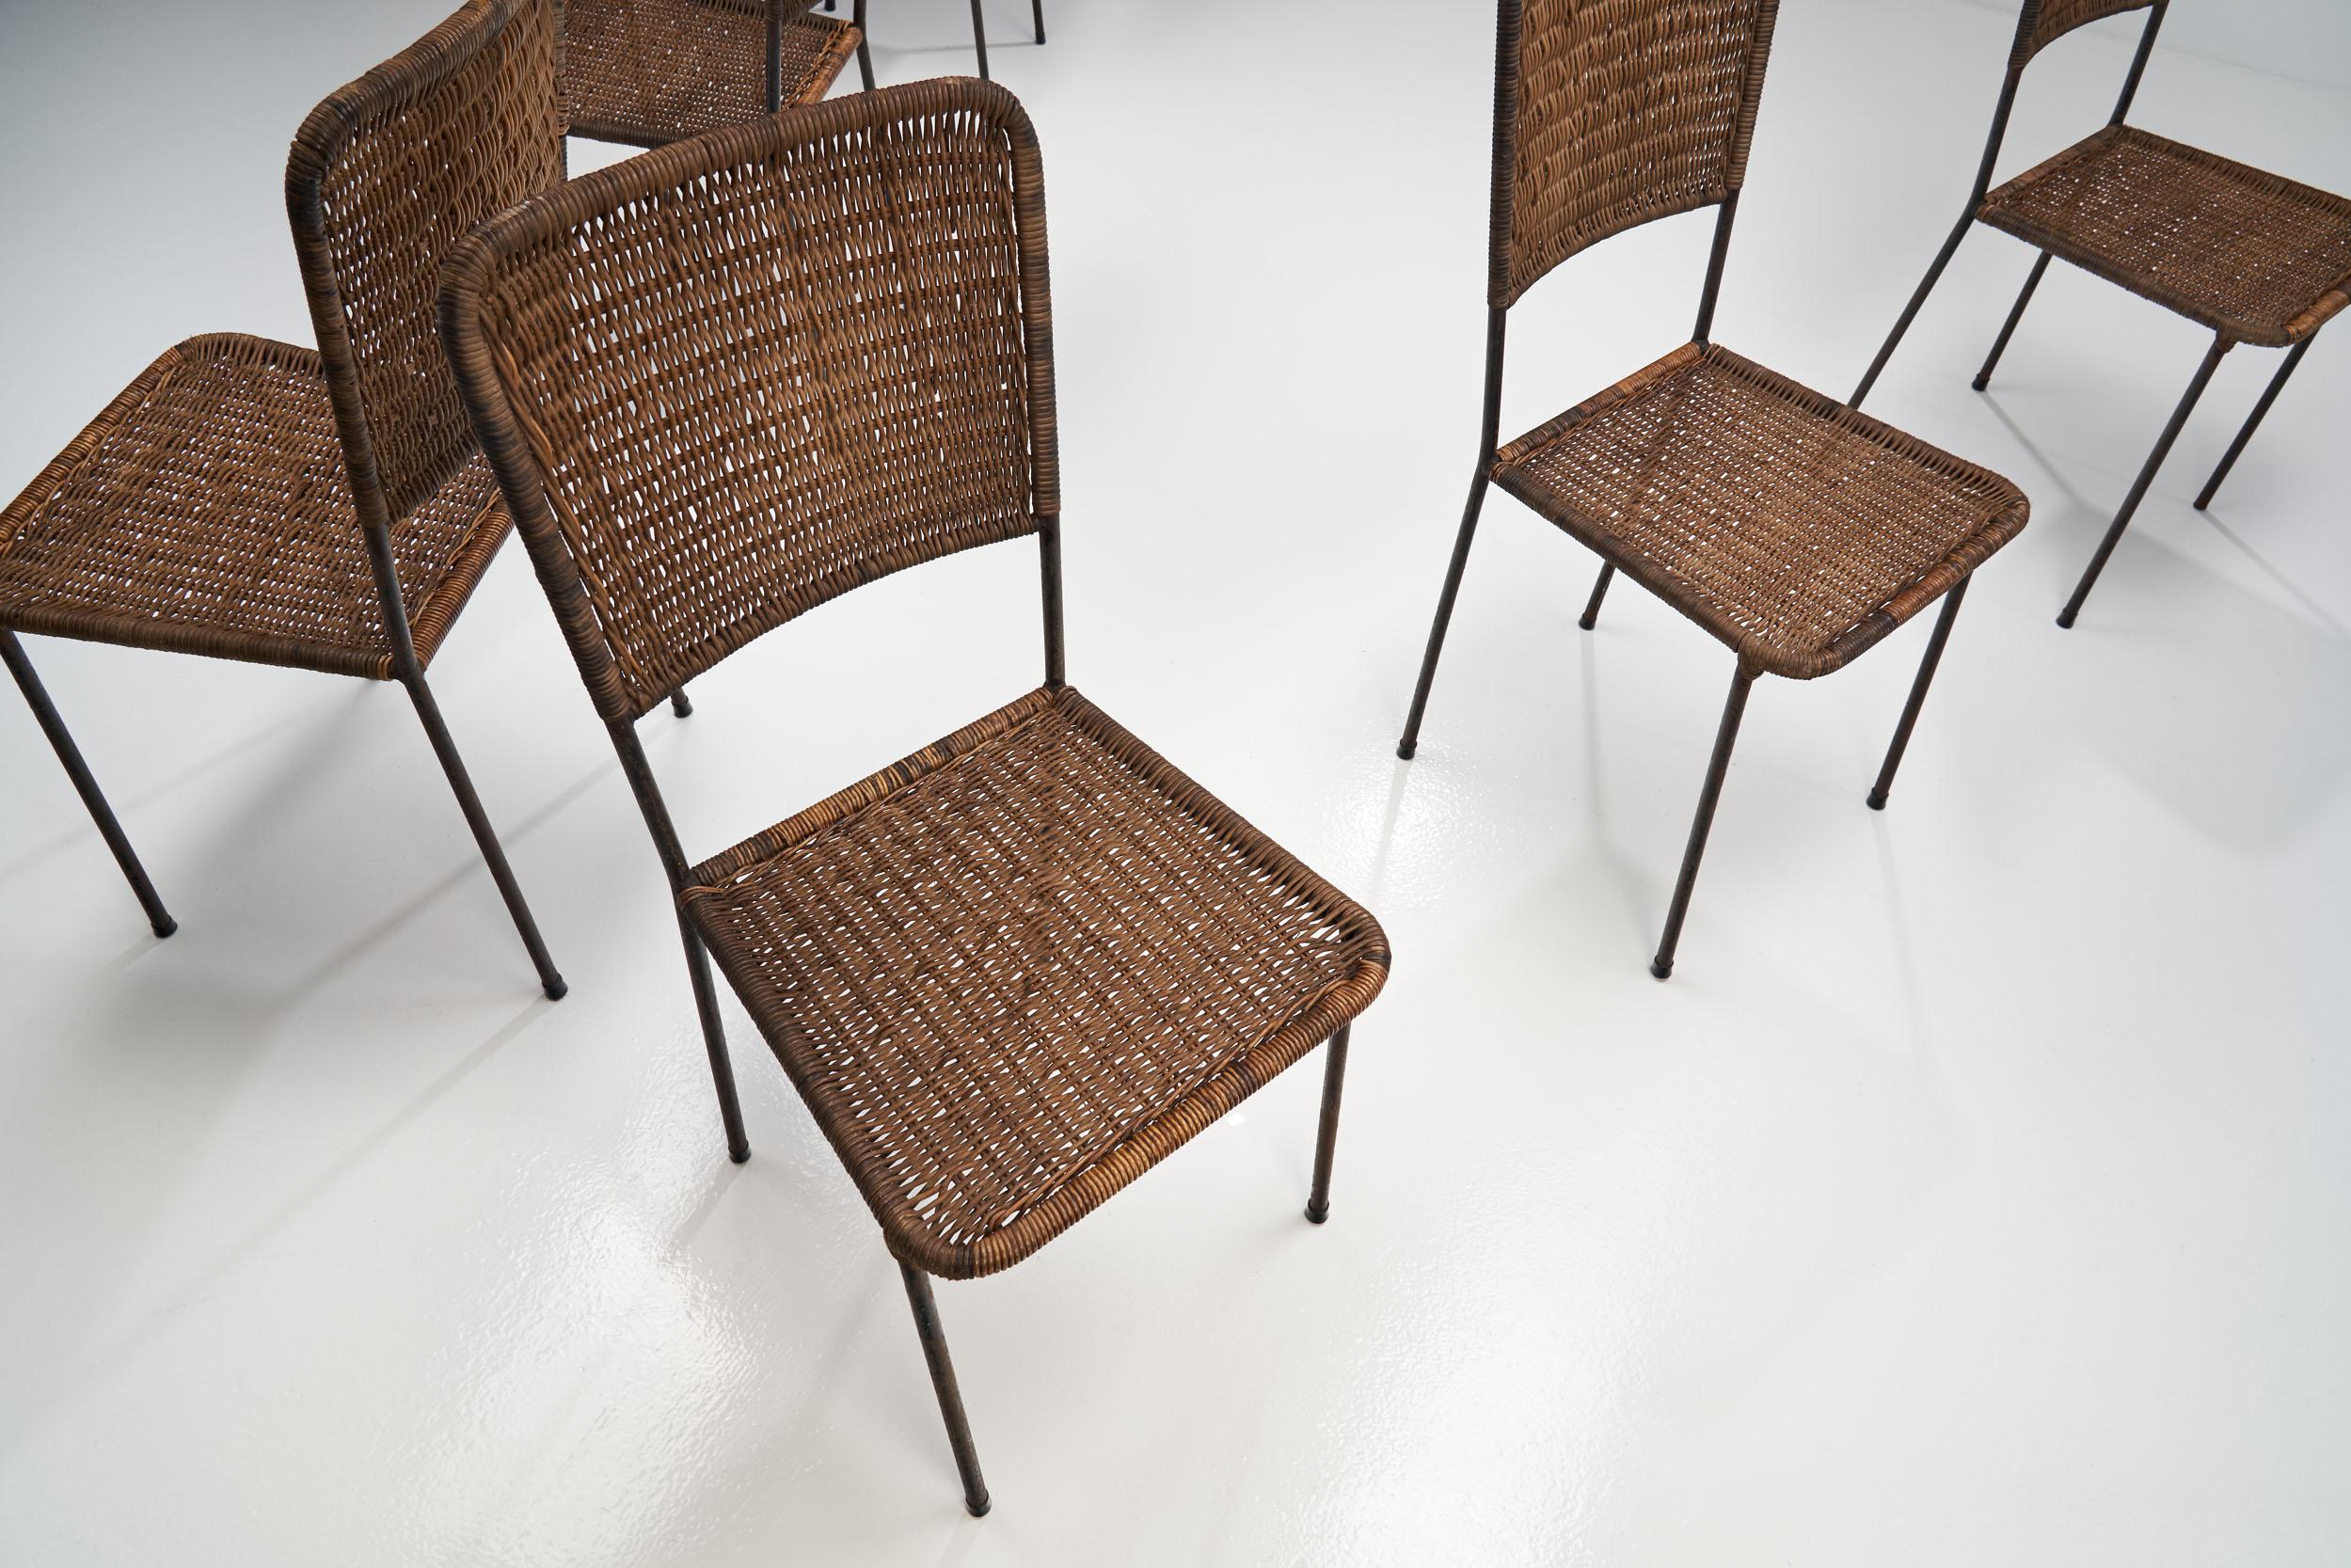 6 Iron and Rattan Chairs, Brazil, 1960s For Sale 1